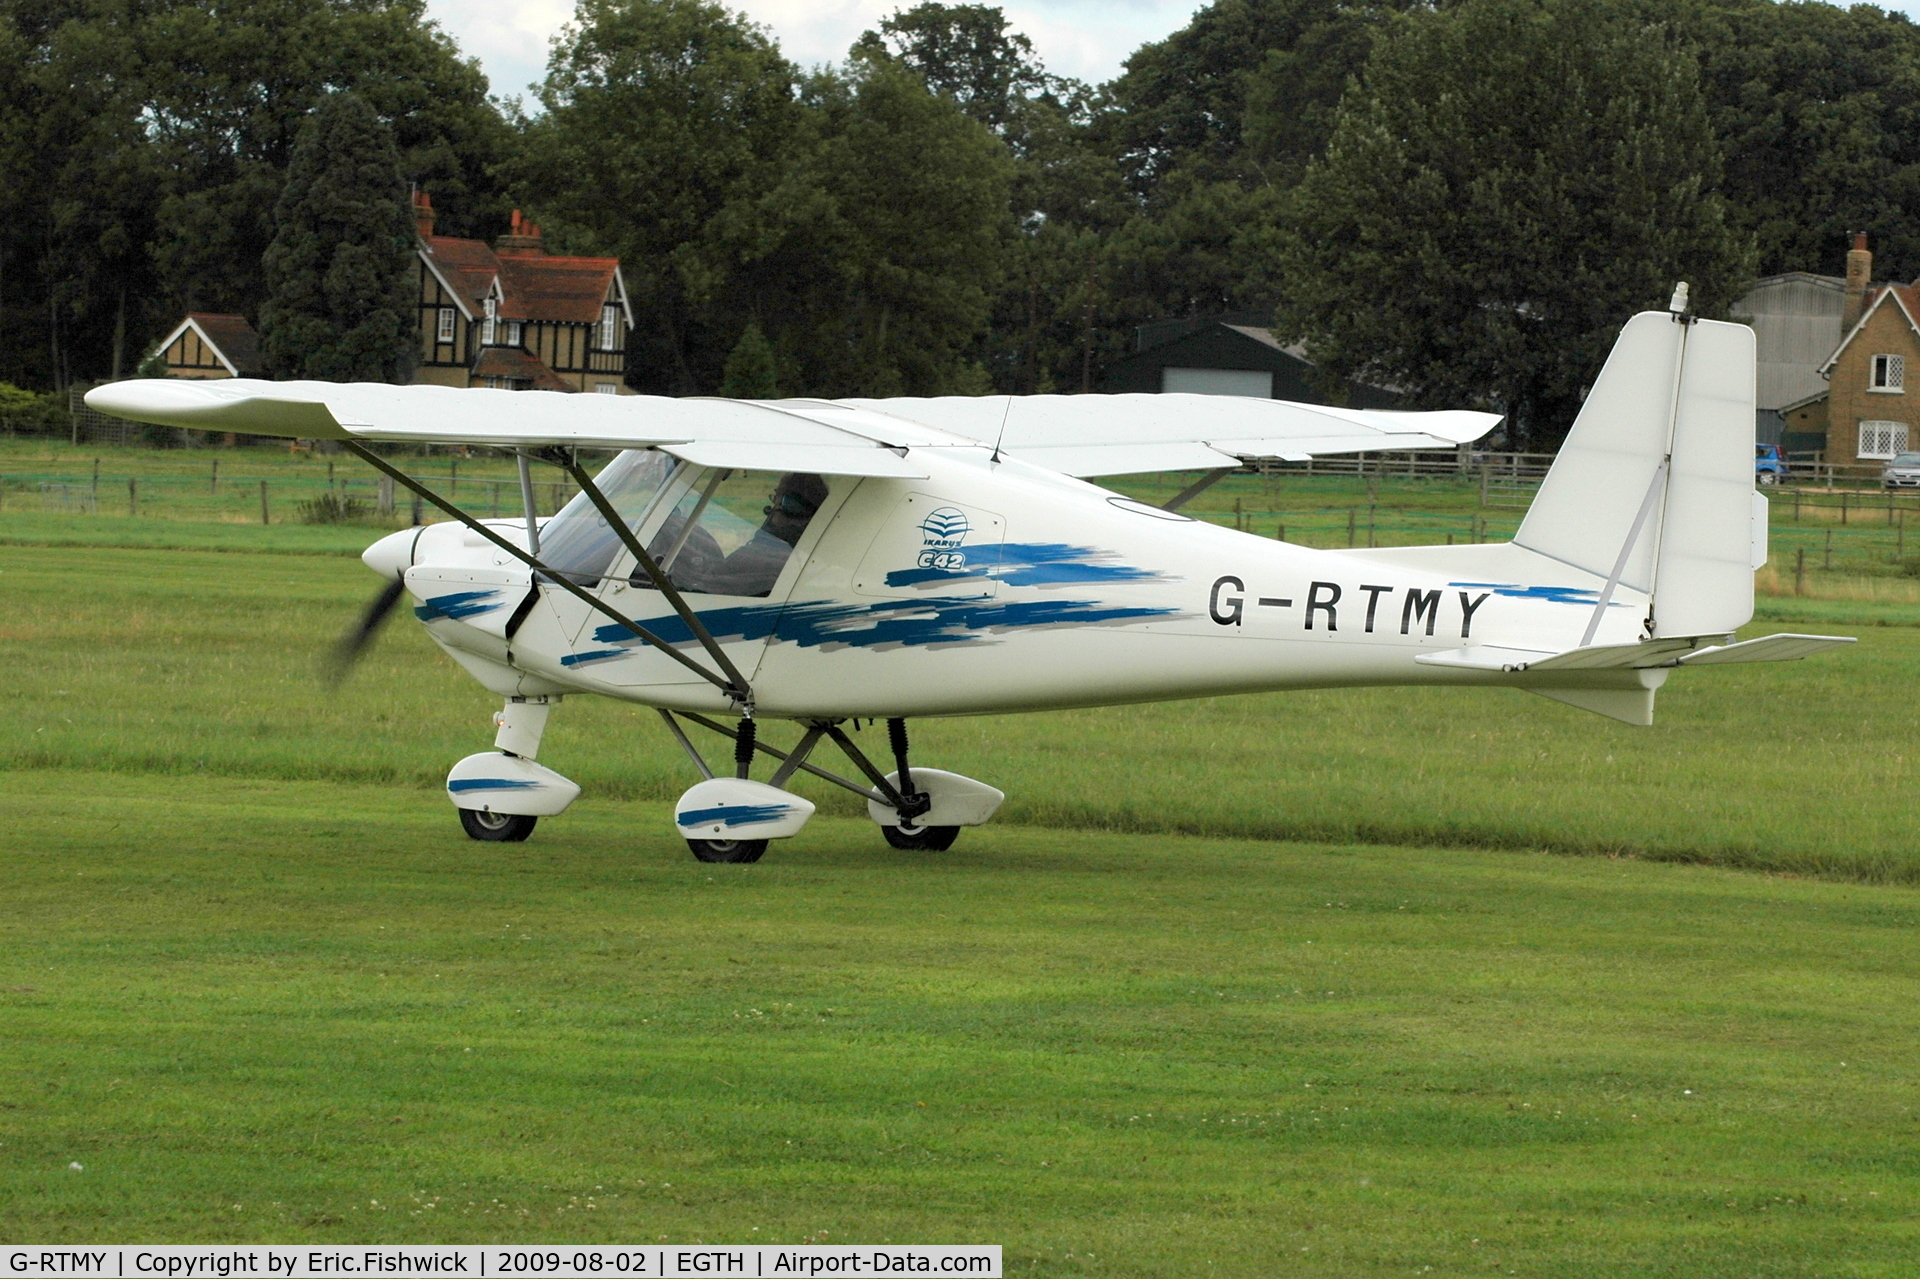 G-RTMY, 2005 Comco Ikarus C42 FB100 C/N 0502-6655, G-RTMY departing Shuttleworth Military Pagent Air Display Aug 09